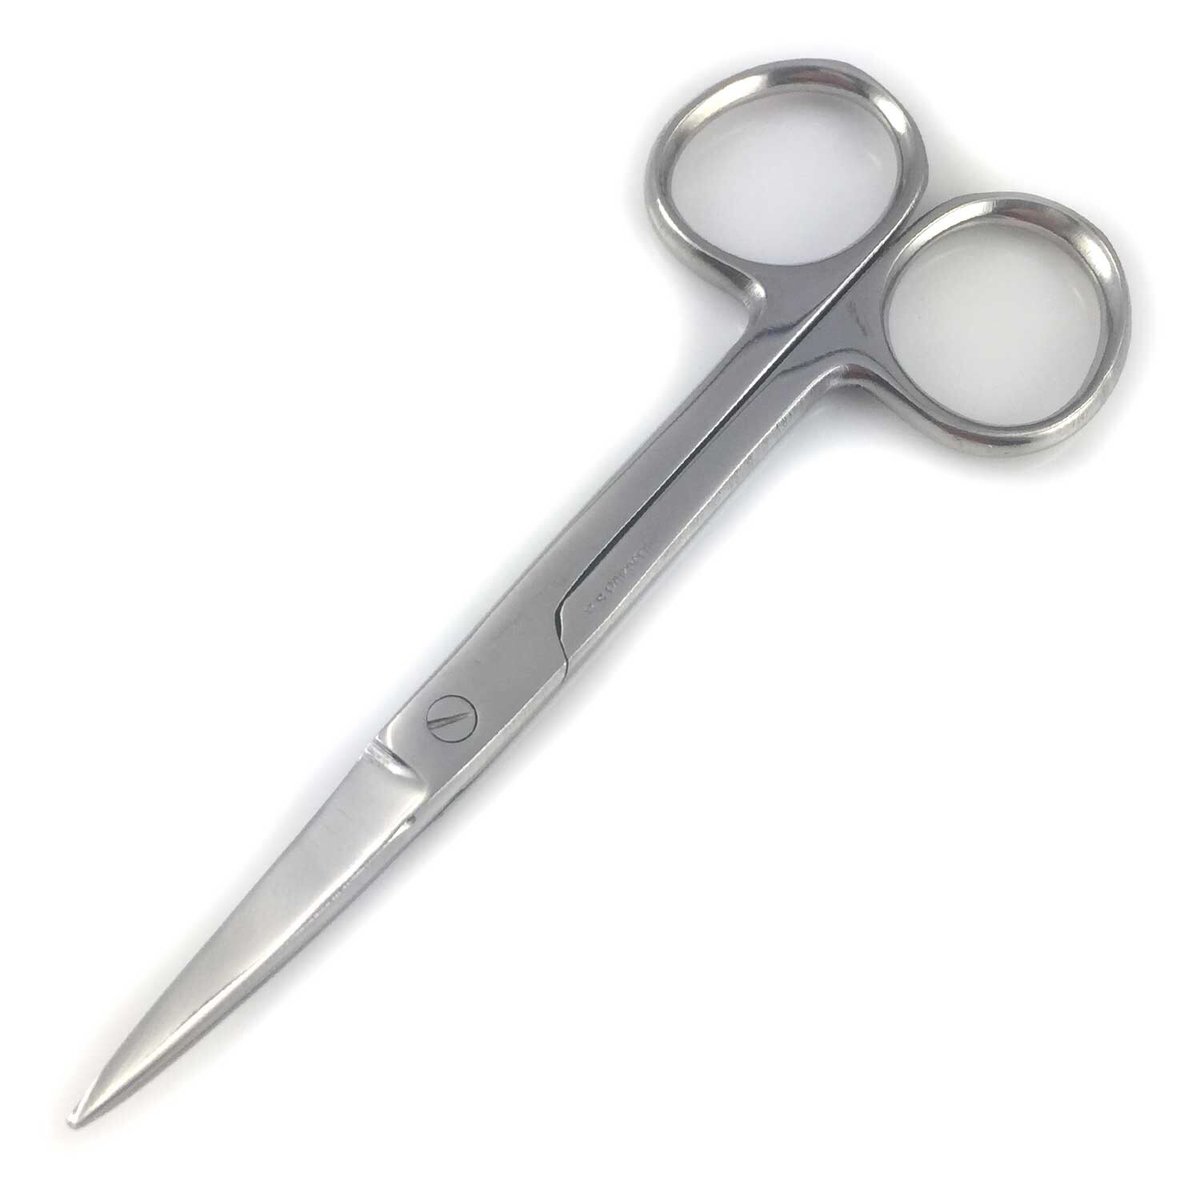 Defender Stainless 3.5-inch Safety Scissors